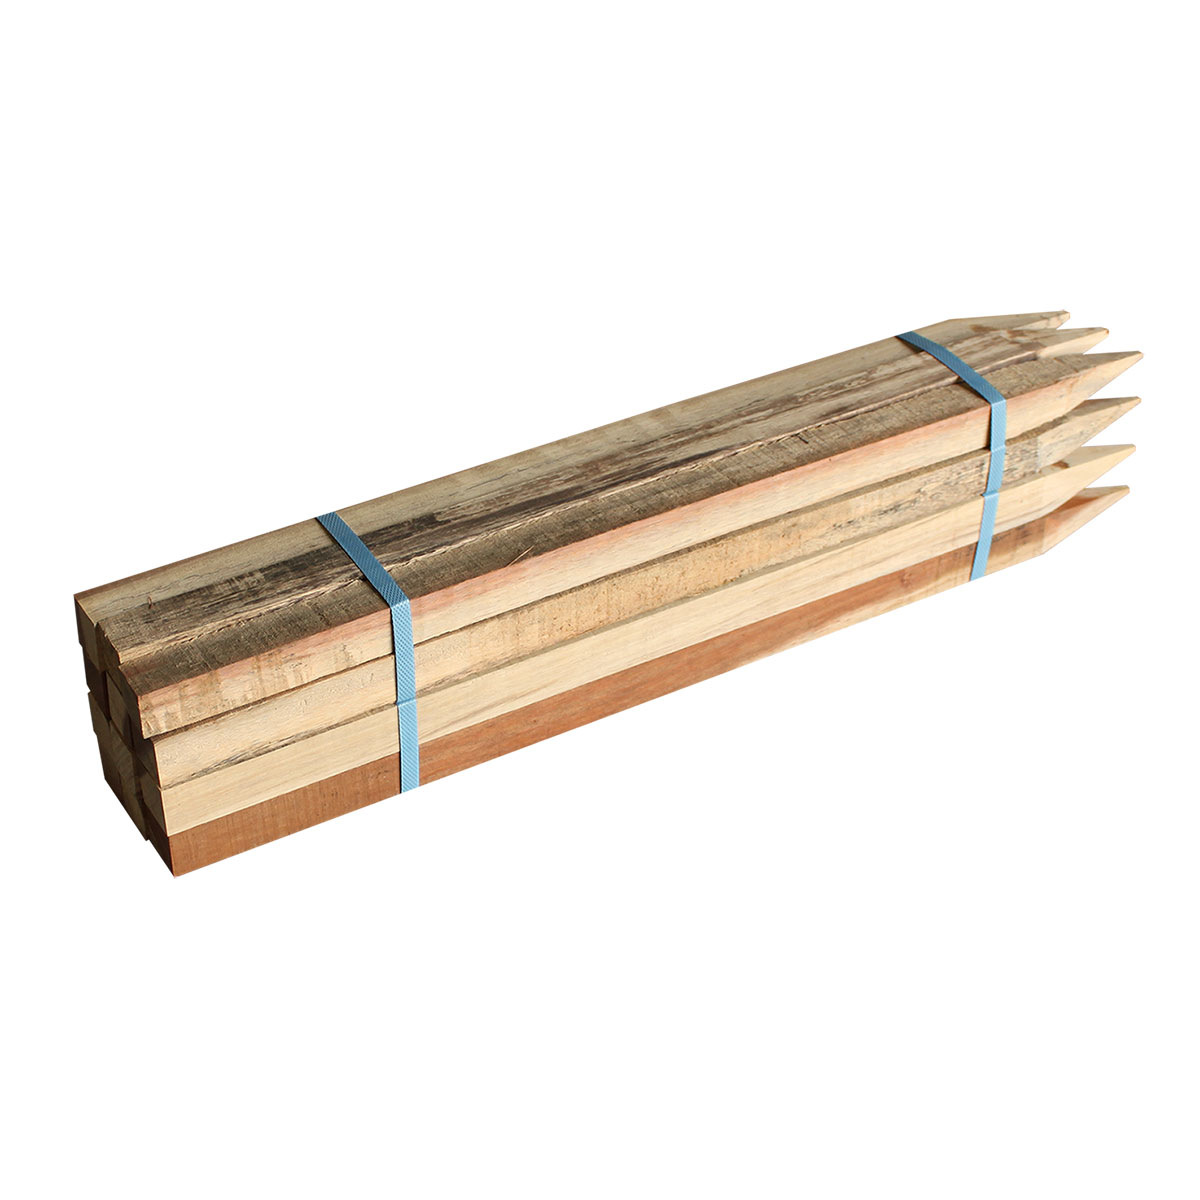 Hardwood Stakes 38 x 38 x 600mm - 12 Pack